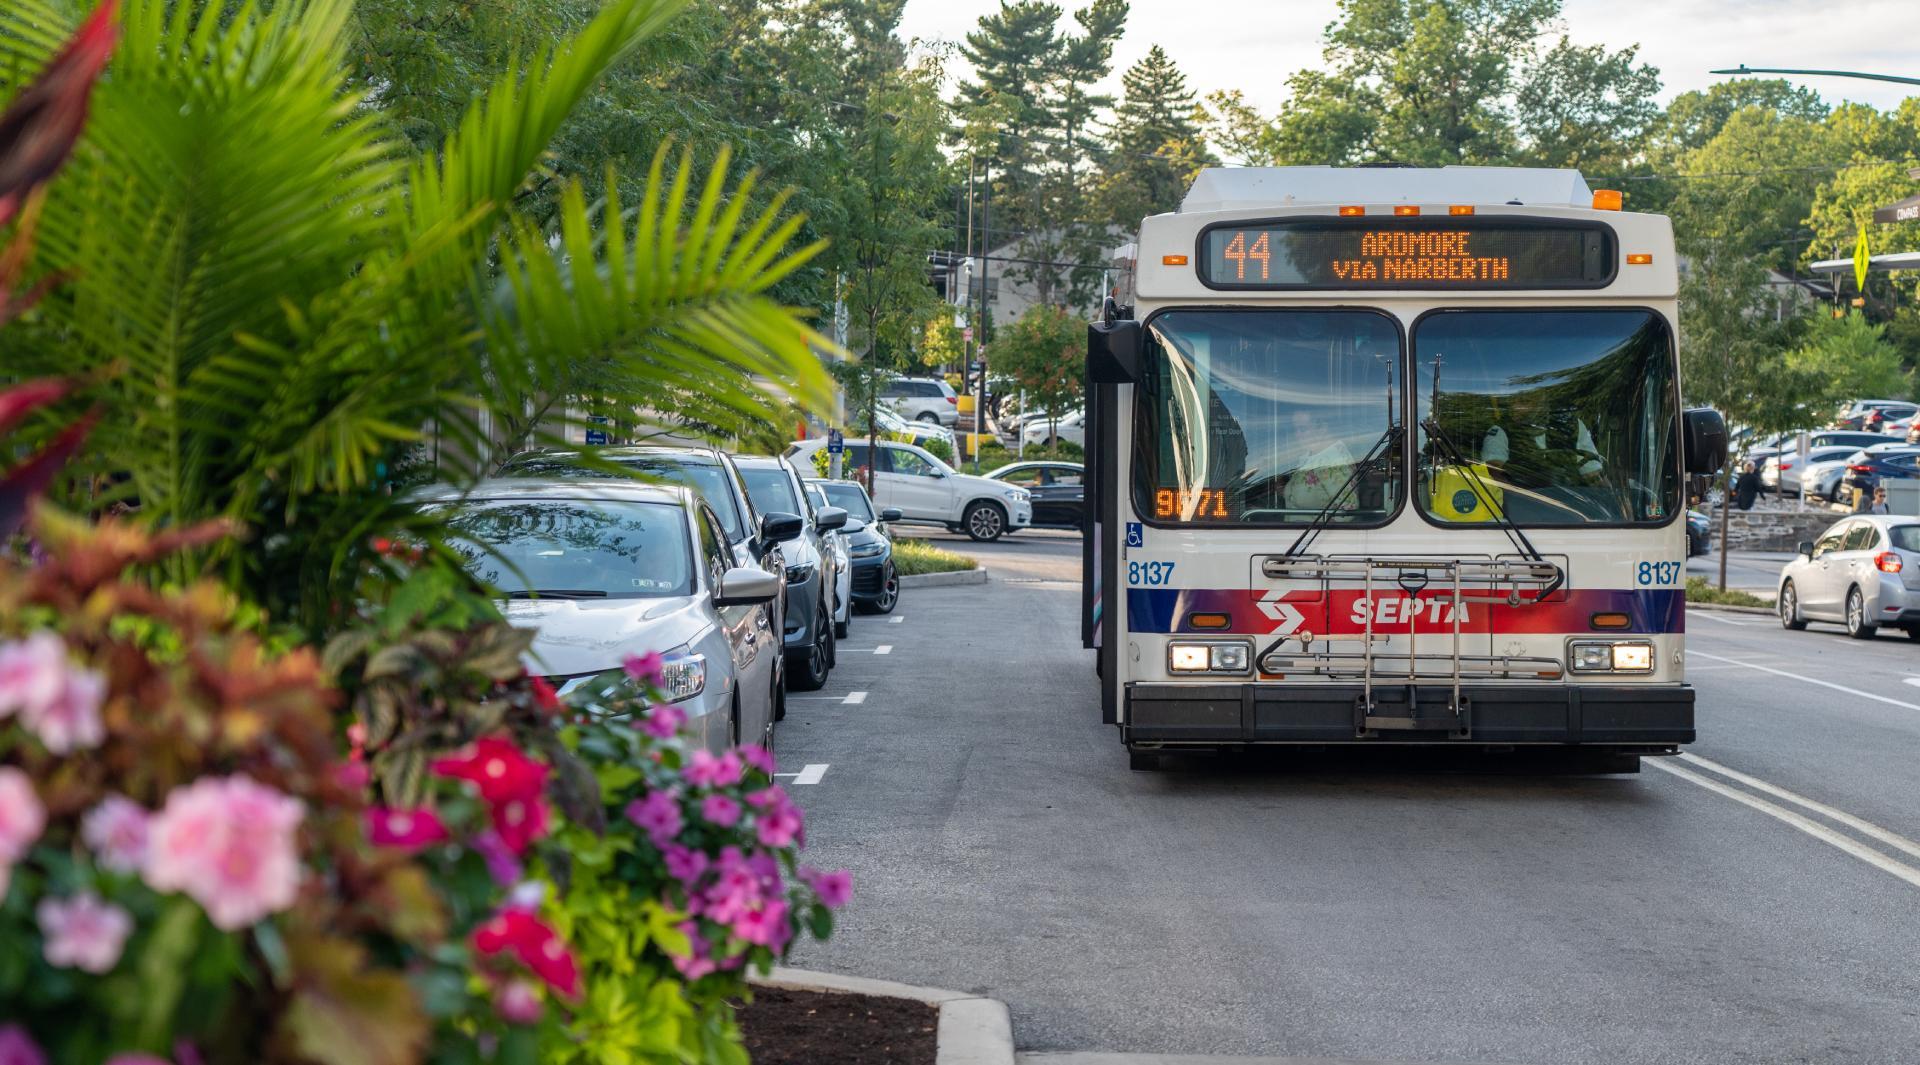 The number 44 SEPTA bus arriving at the Suburban Square stop